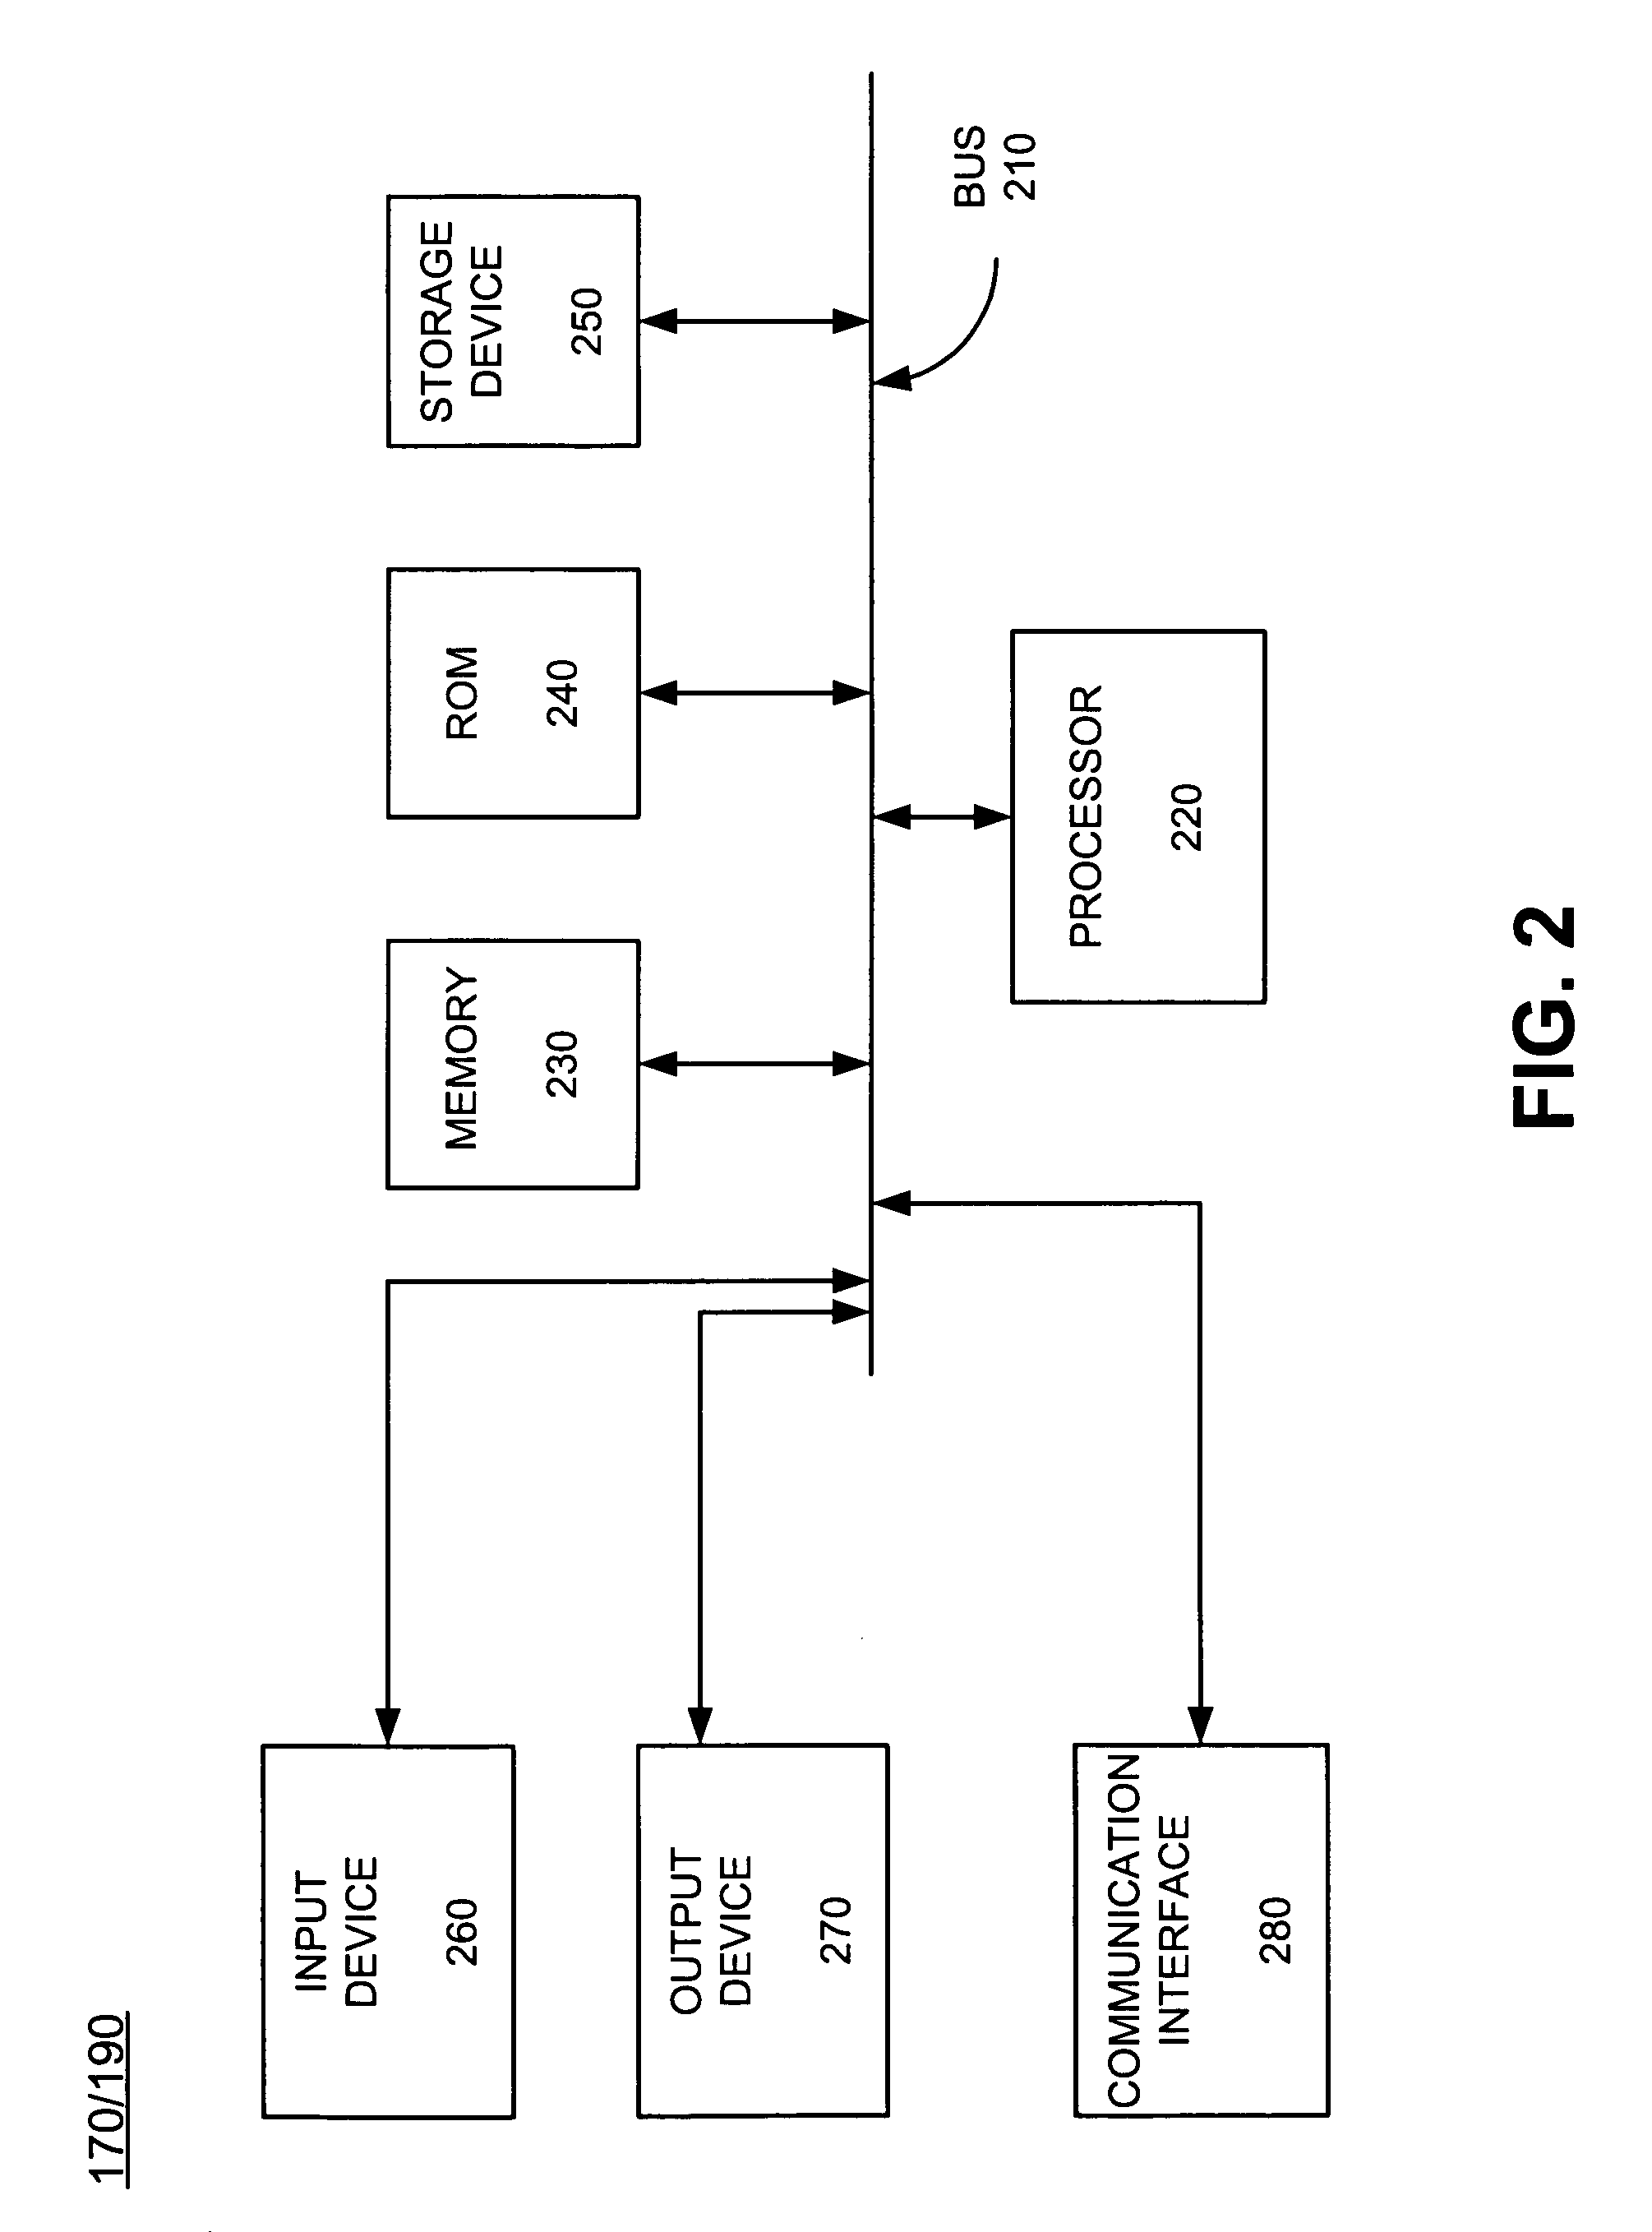 Systems and methods for facilitating communications involving hearing-impaired parties